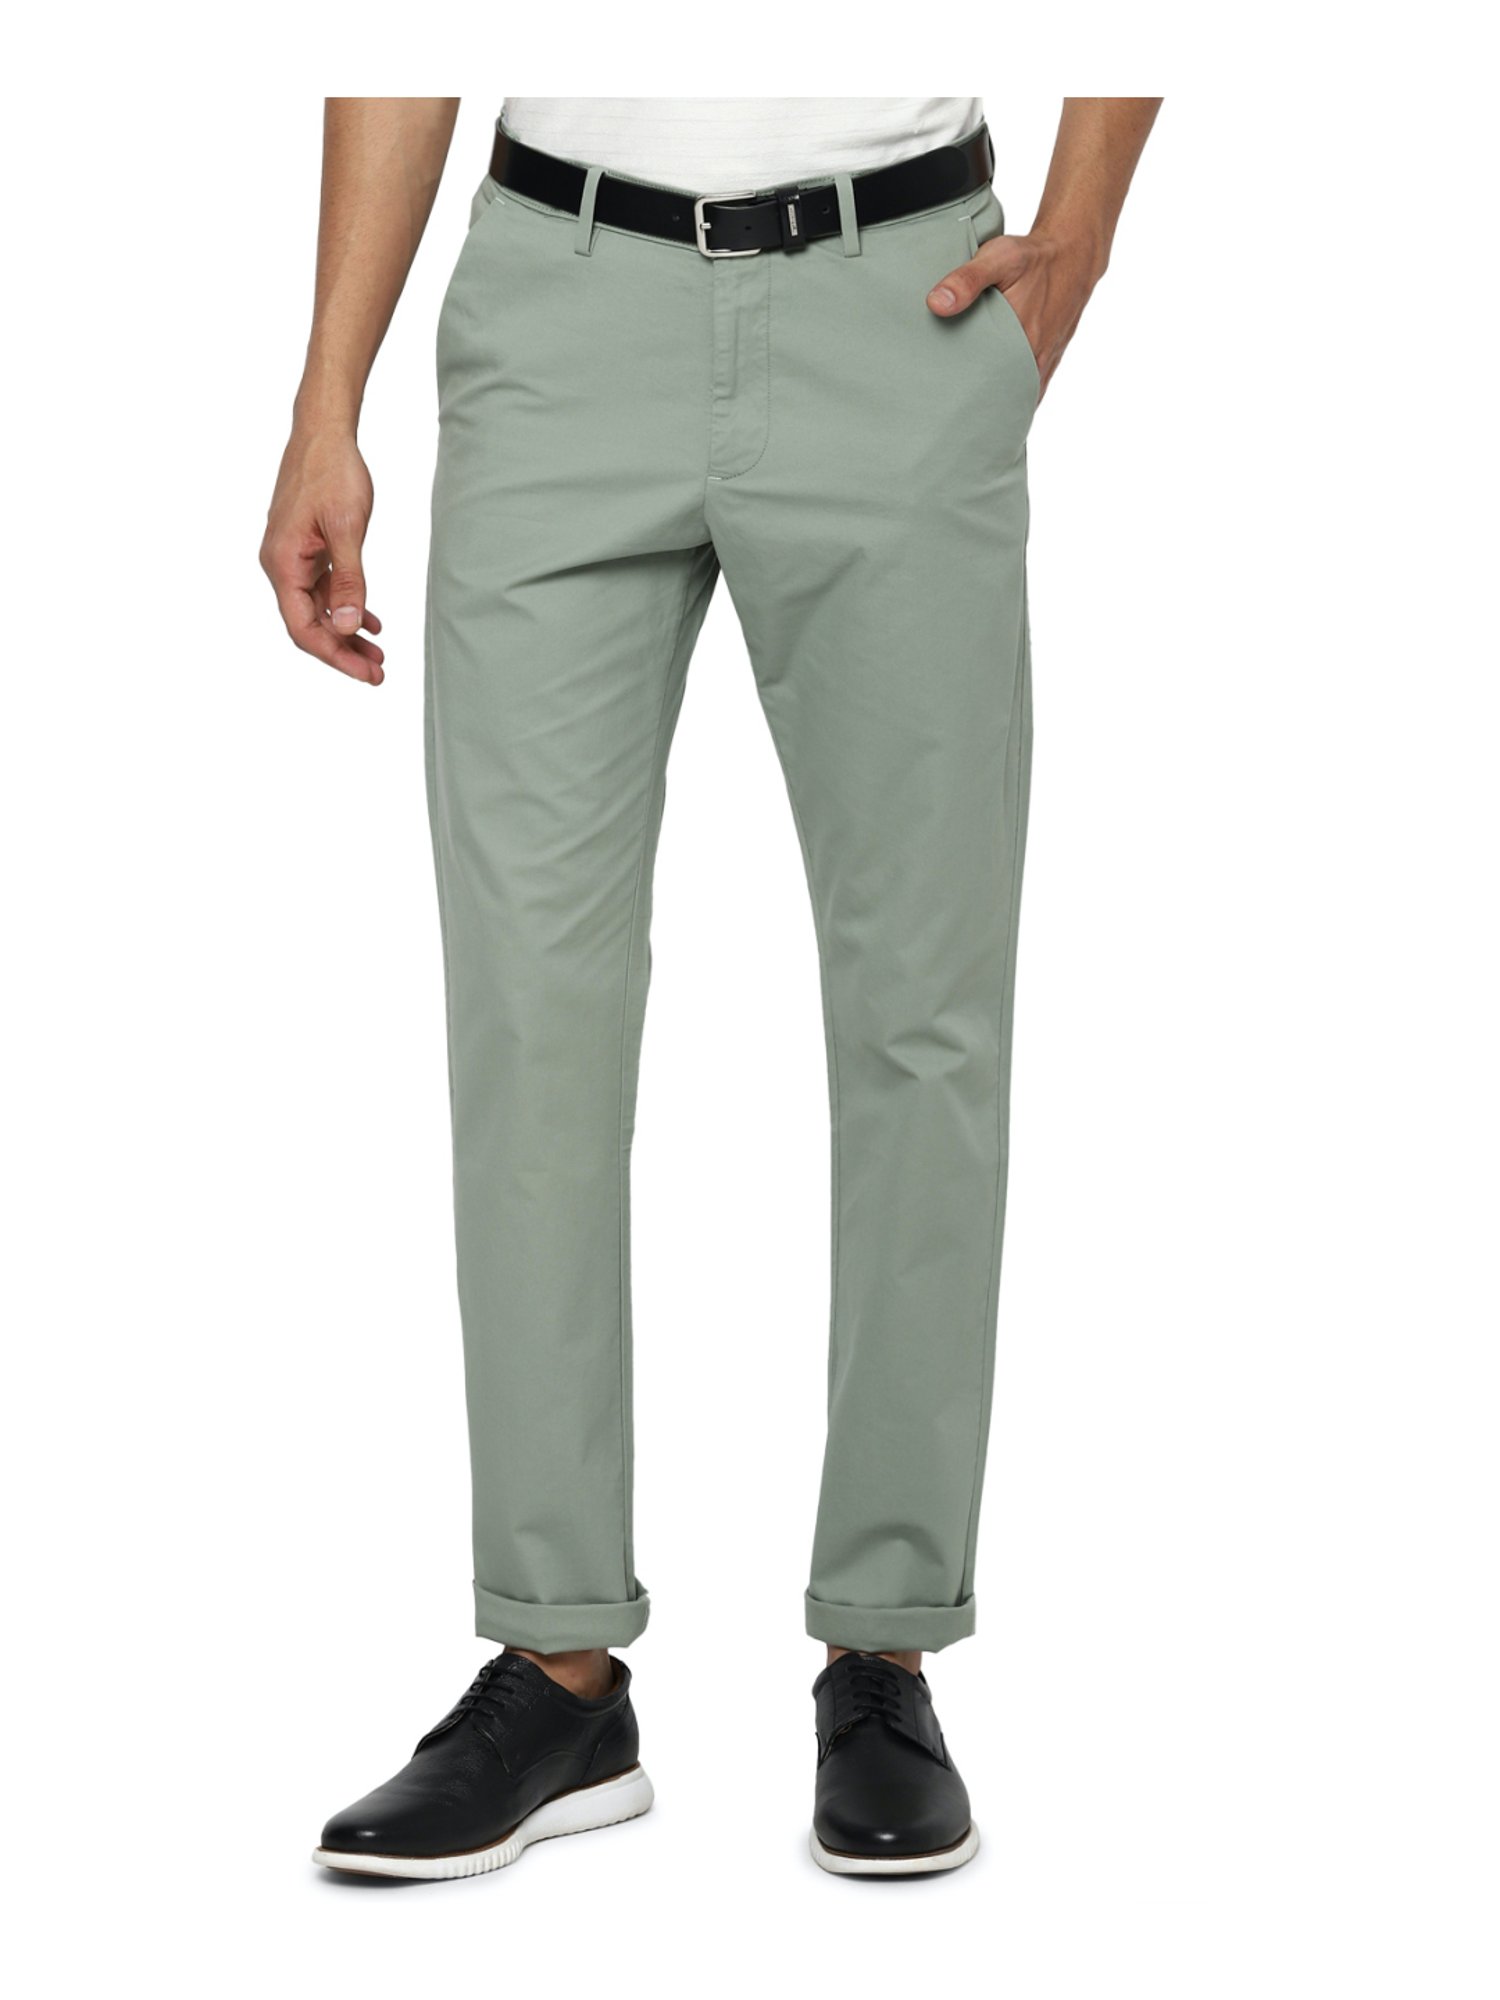 Allen Solly Trousers  Chinos Allen Solly Khaki Trousers for Men at  Allensollycom